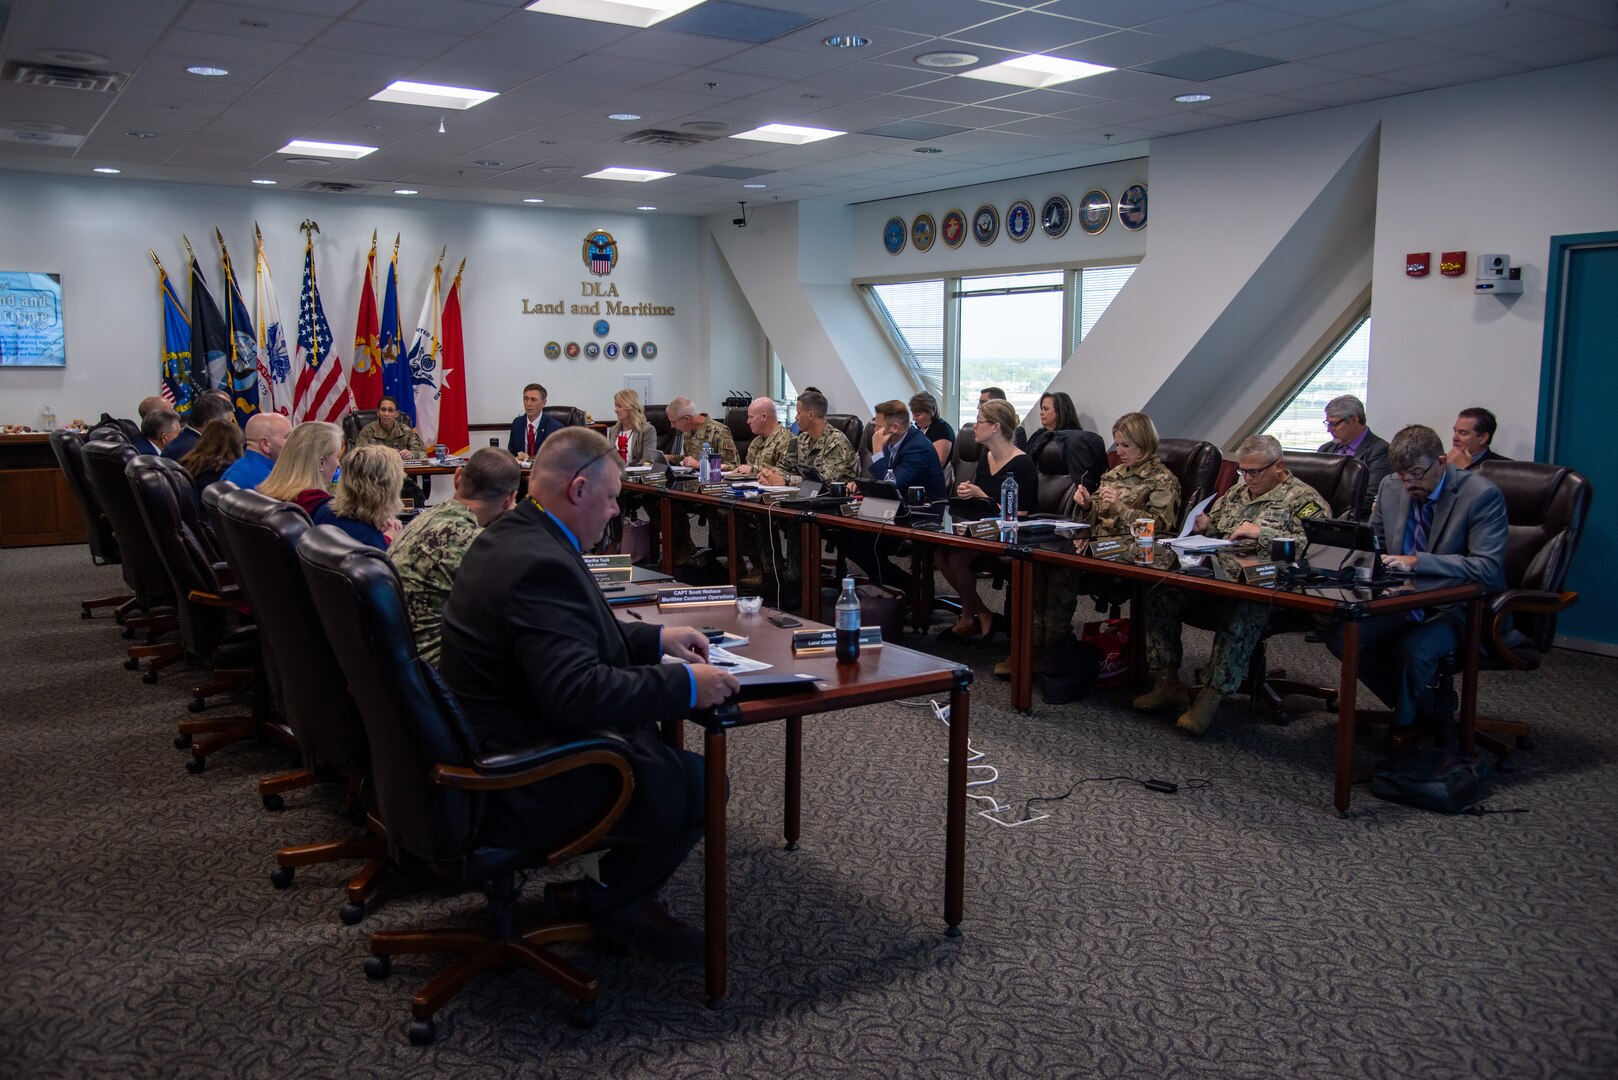 A group of people sit in a conference room at a large table. Some in military uniforms and some in business attire.